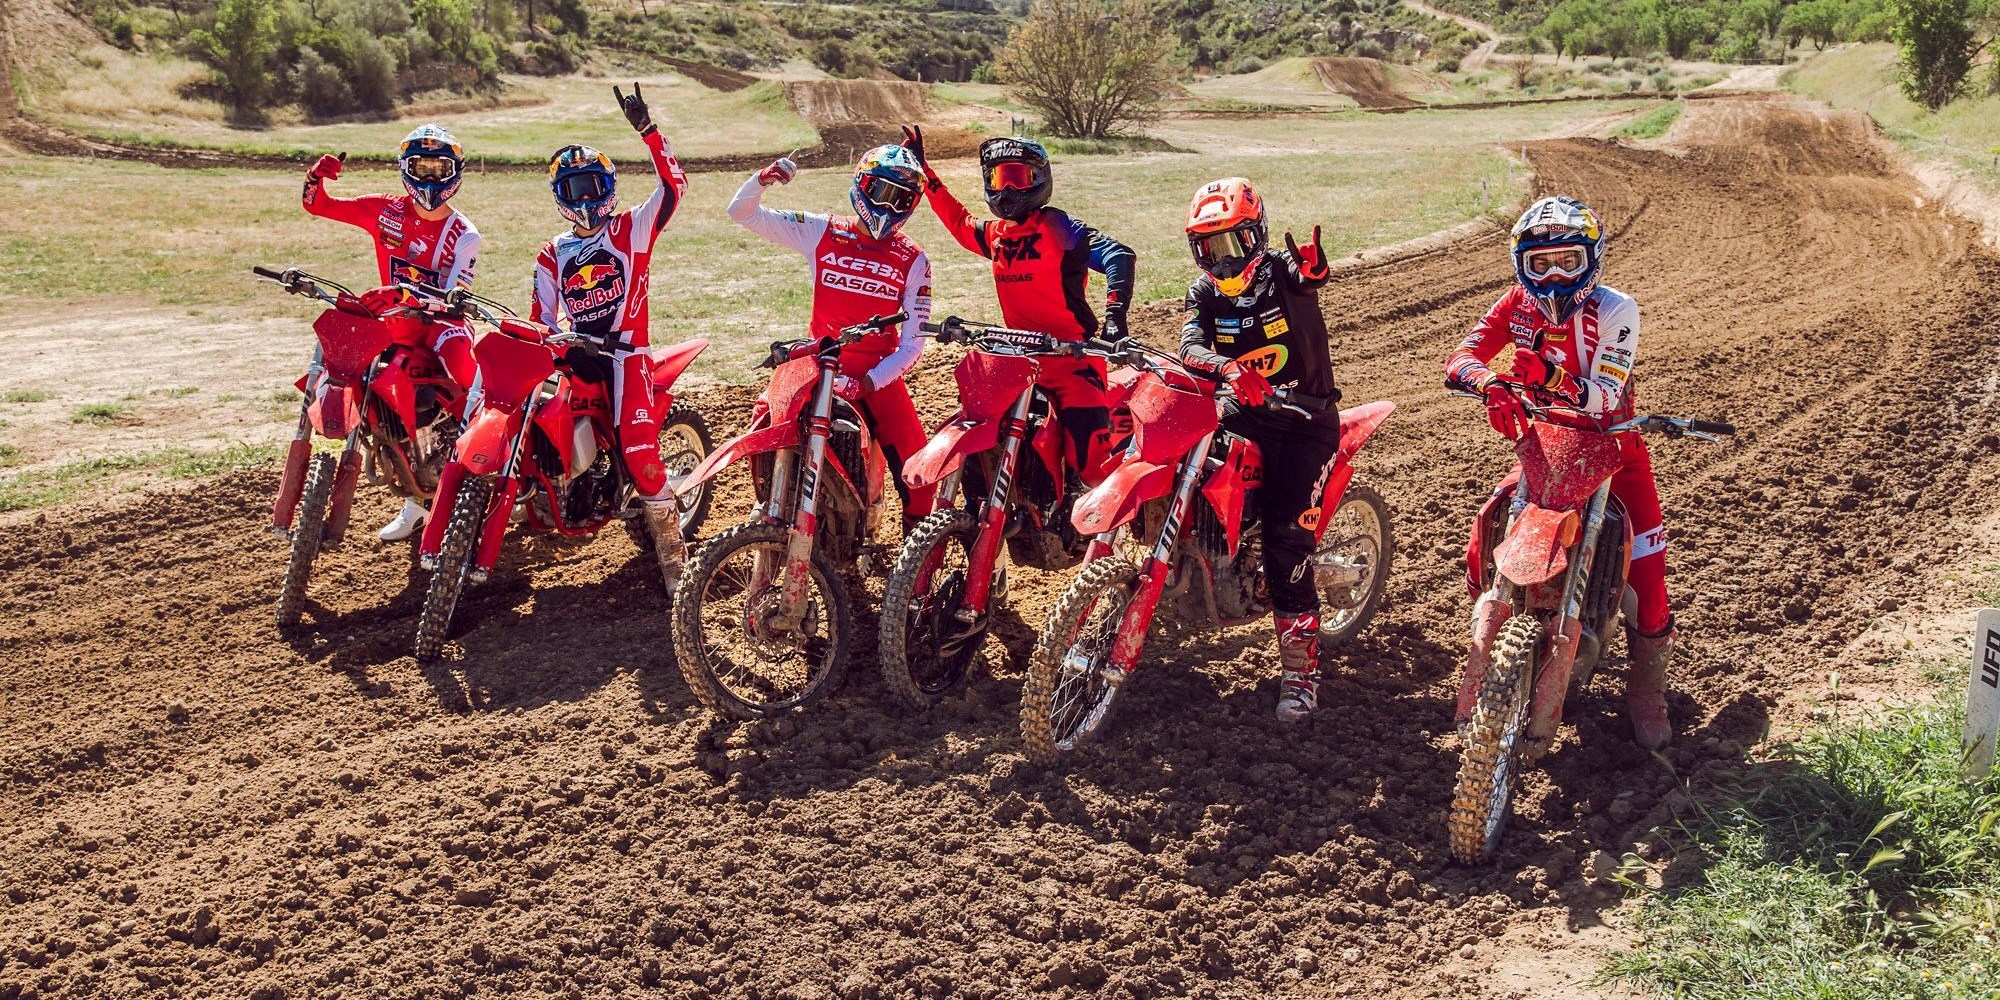 FULL GAS WITH THE ALL-NEW MOTOCROSS LINEUP!